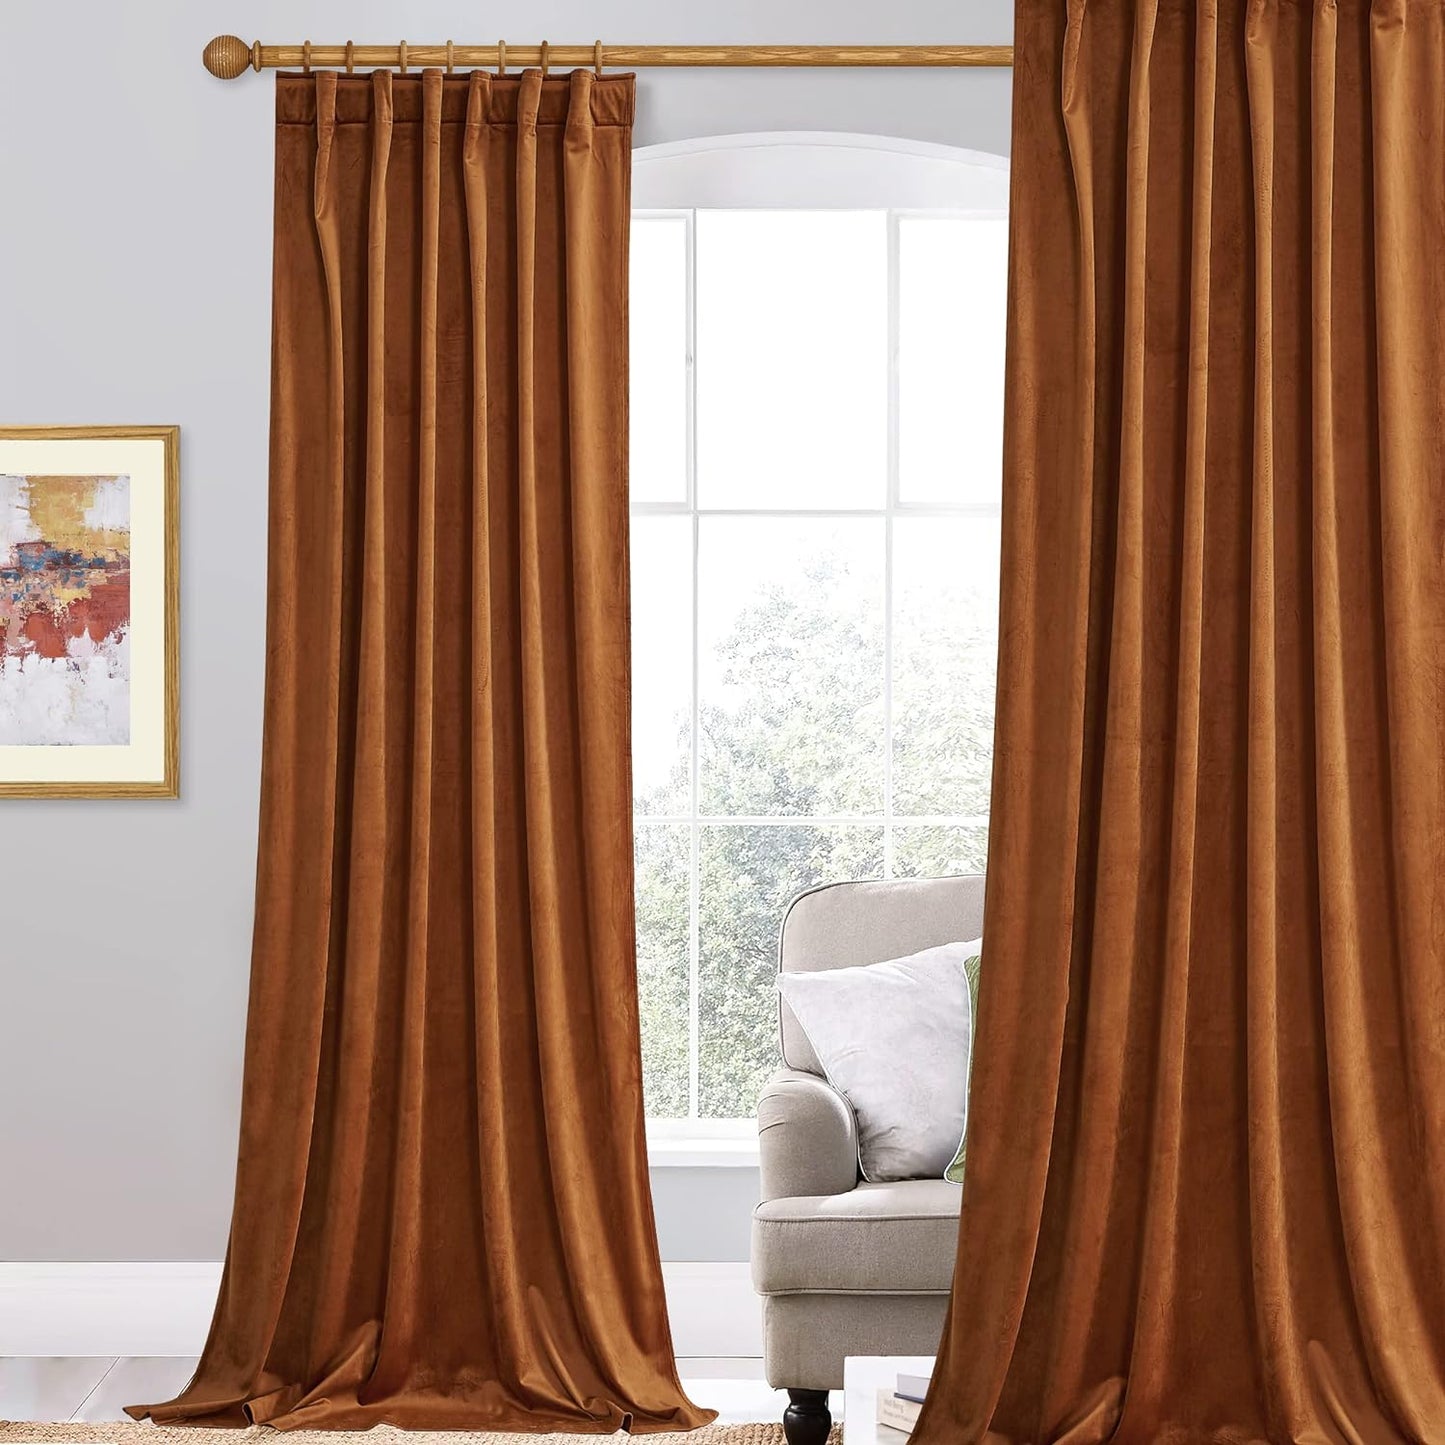 Stangh Navy Blue Velvet Curtains 96 Inches Long for Living Room, Luxury Blackout Sliding Door Curtains Thermal Insulated Window Drapes for Bedroom, W52 X L96 Inches, 1 Panel  StangH Burnt Orange W52 X L84 